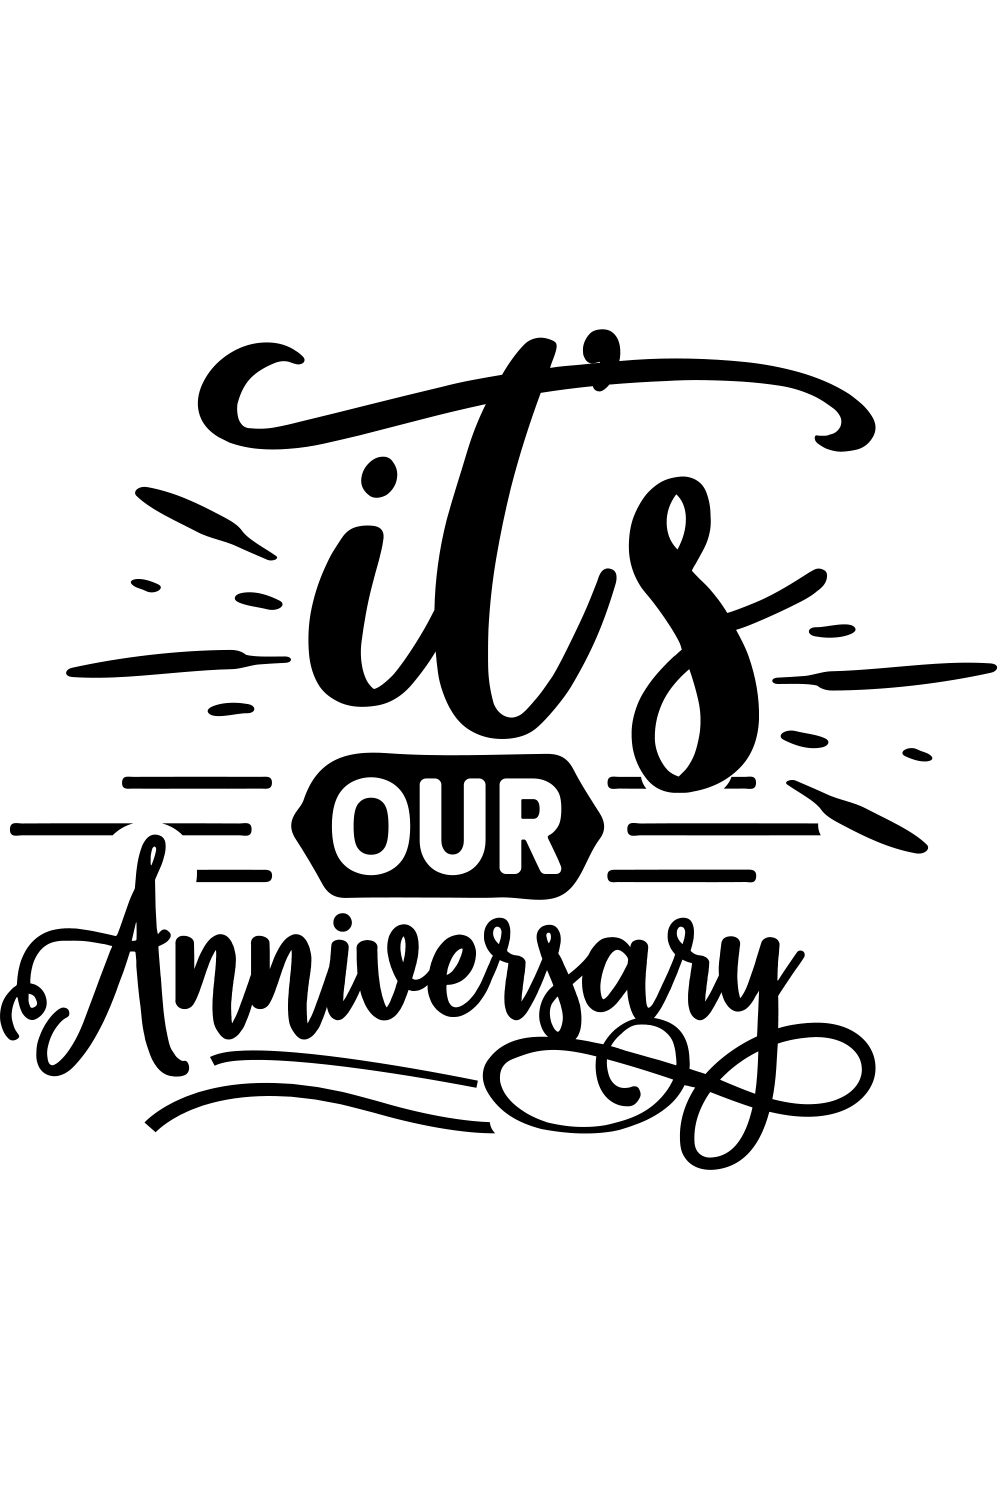 It's Our Anniversary svg pinterest preview image.